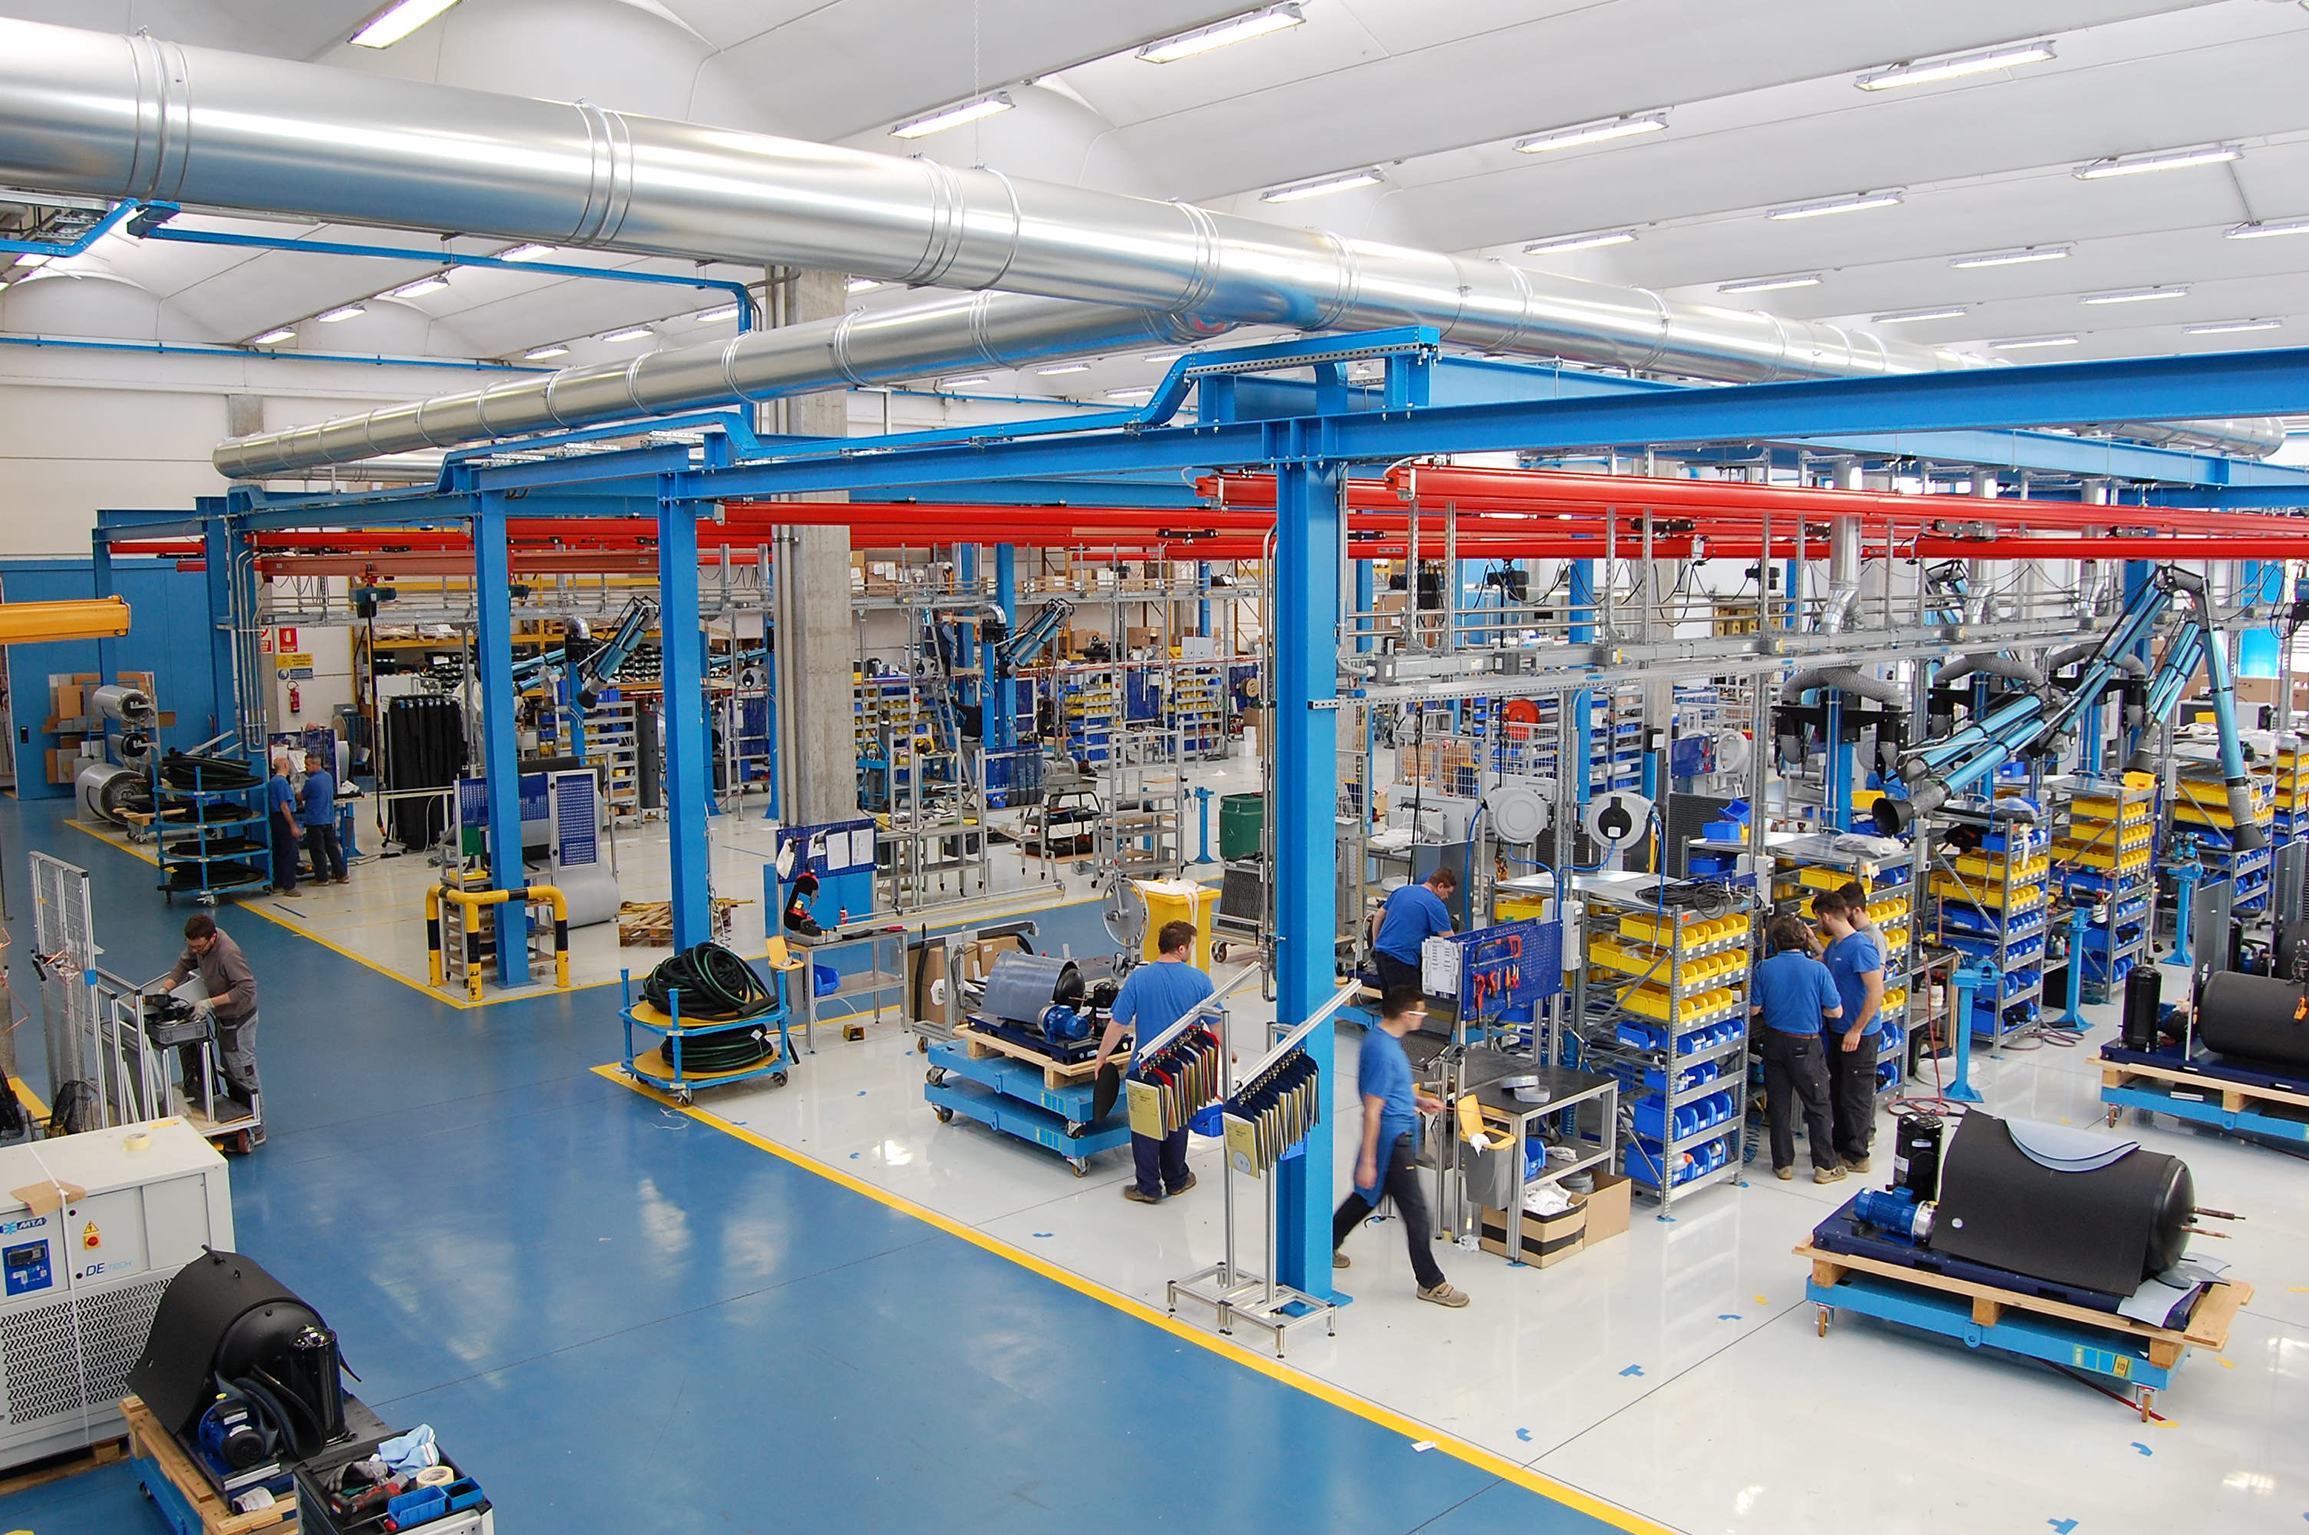 Production of MTA in Conselve, Italy